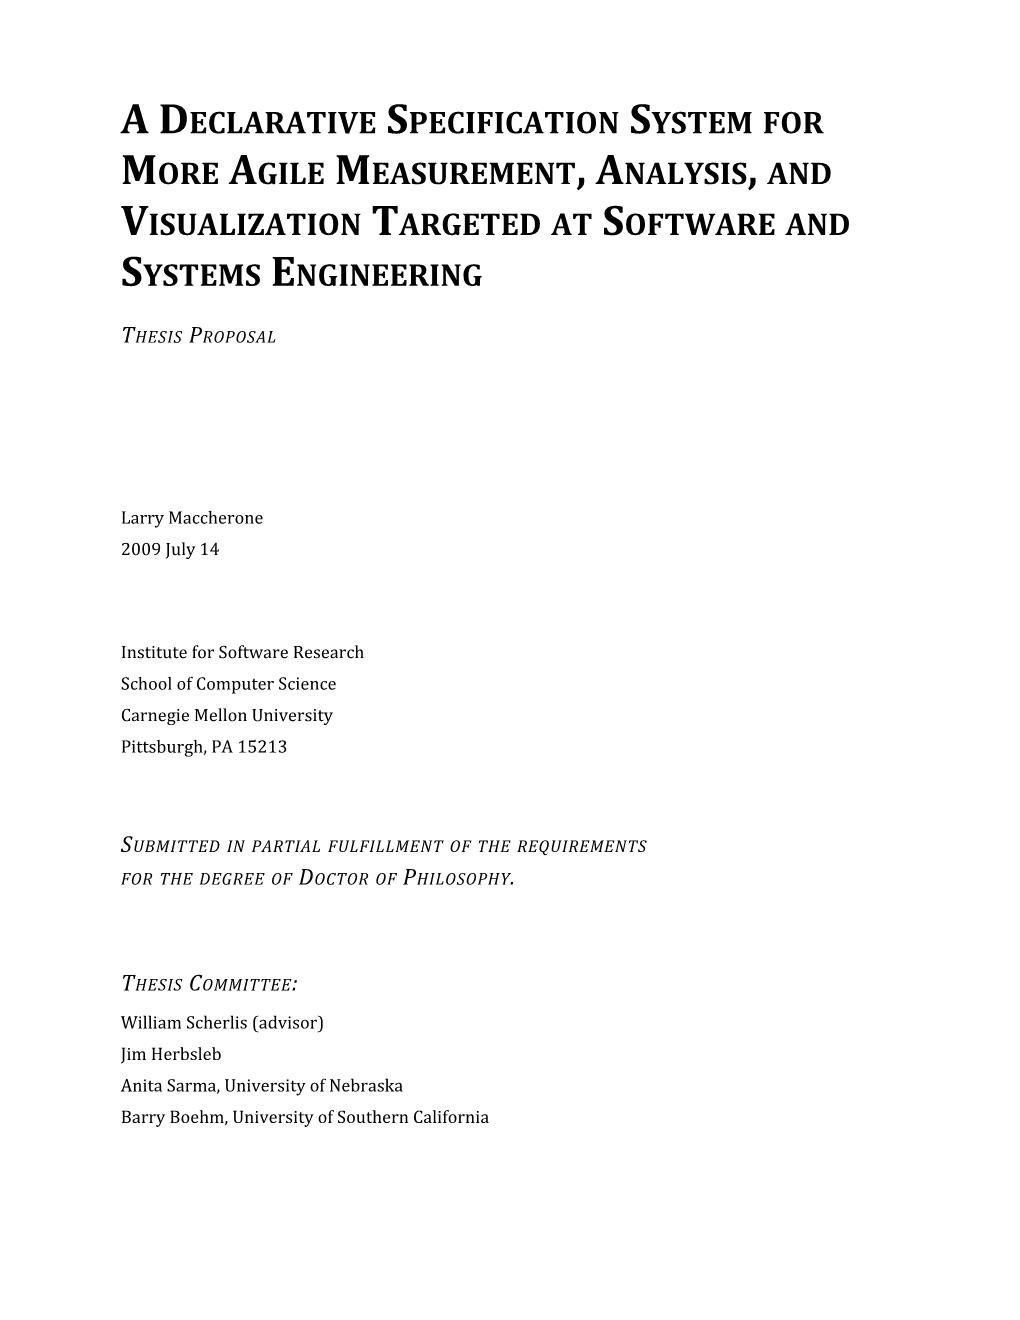 Proposal for a Dissertation Targeting More Agile Measurement